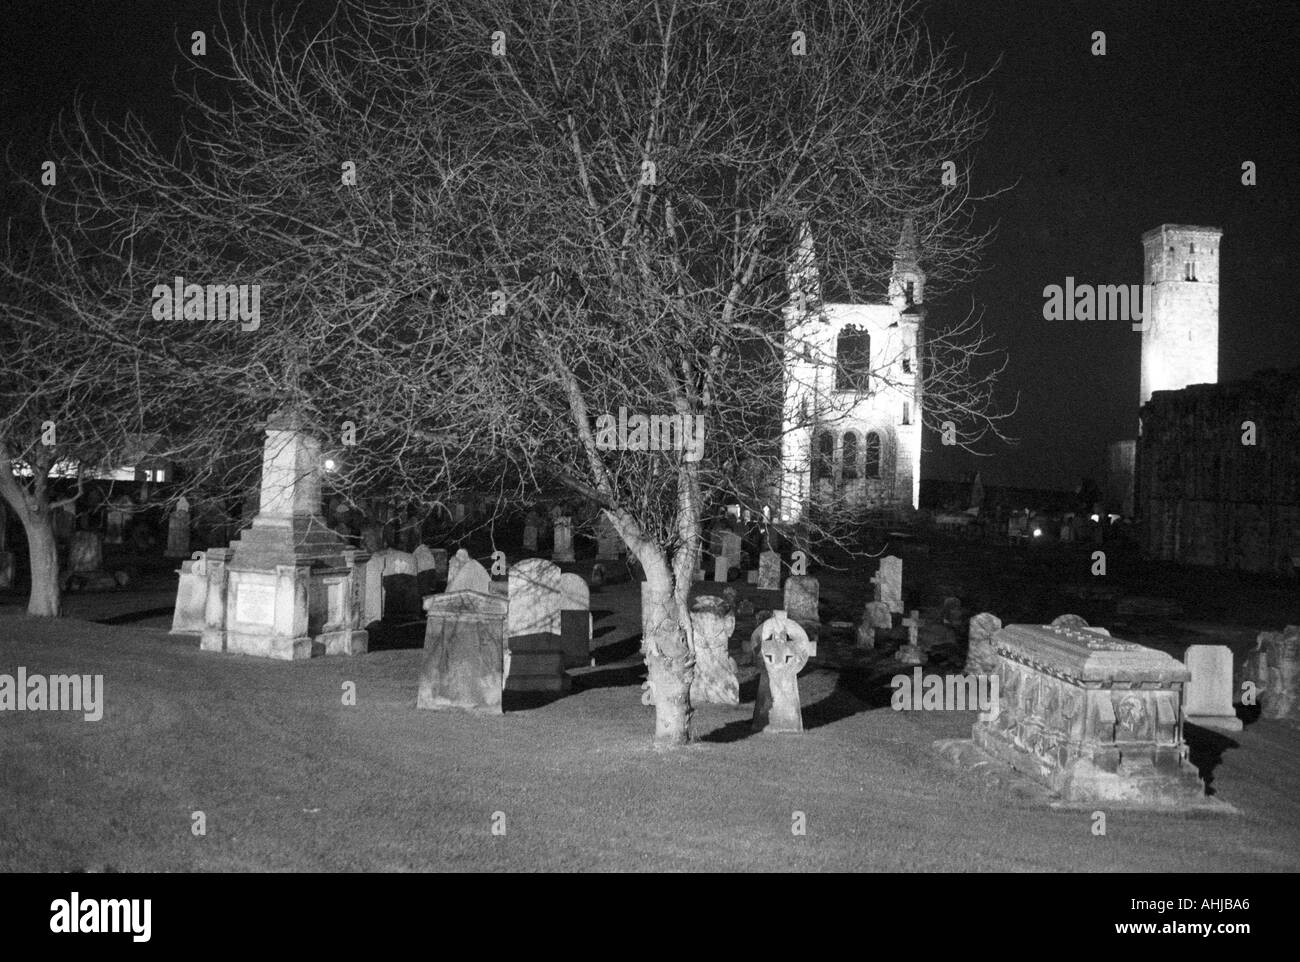 Ruins of eastern gable, graves, tree and St. Rule's Tower in the grounds of St. Andrews Cathedral at night. St. Andrews, Fife, Scotland, UK. Stock Photo